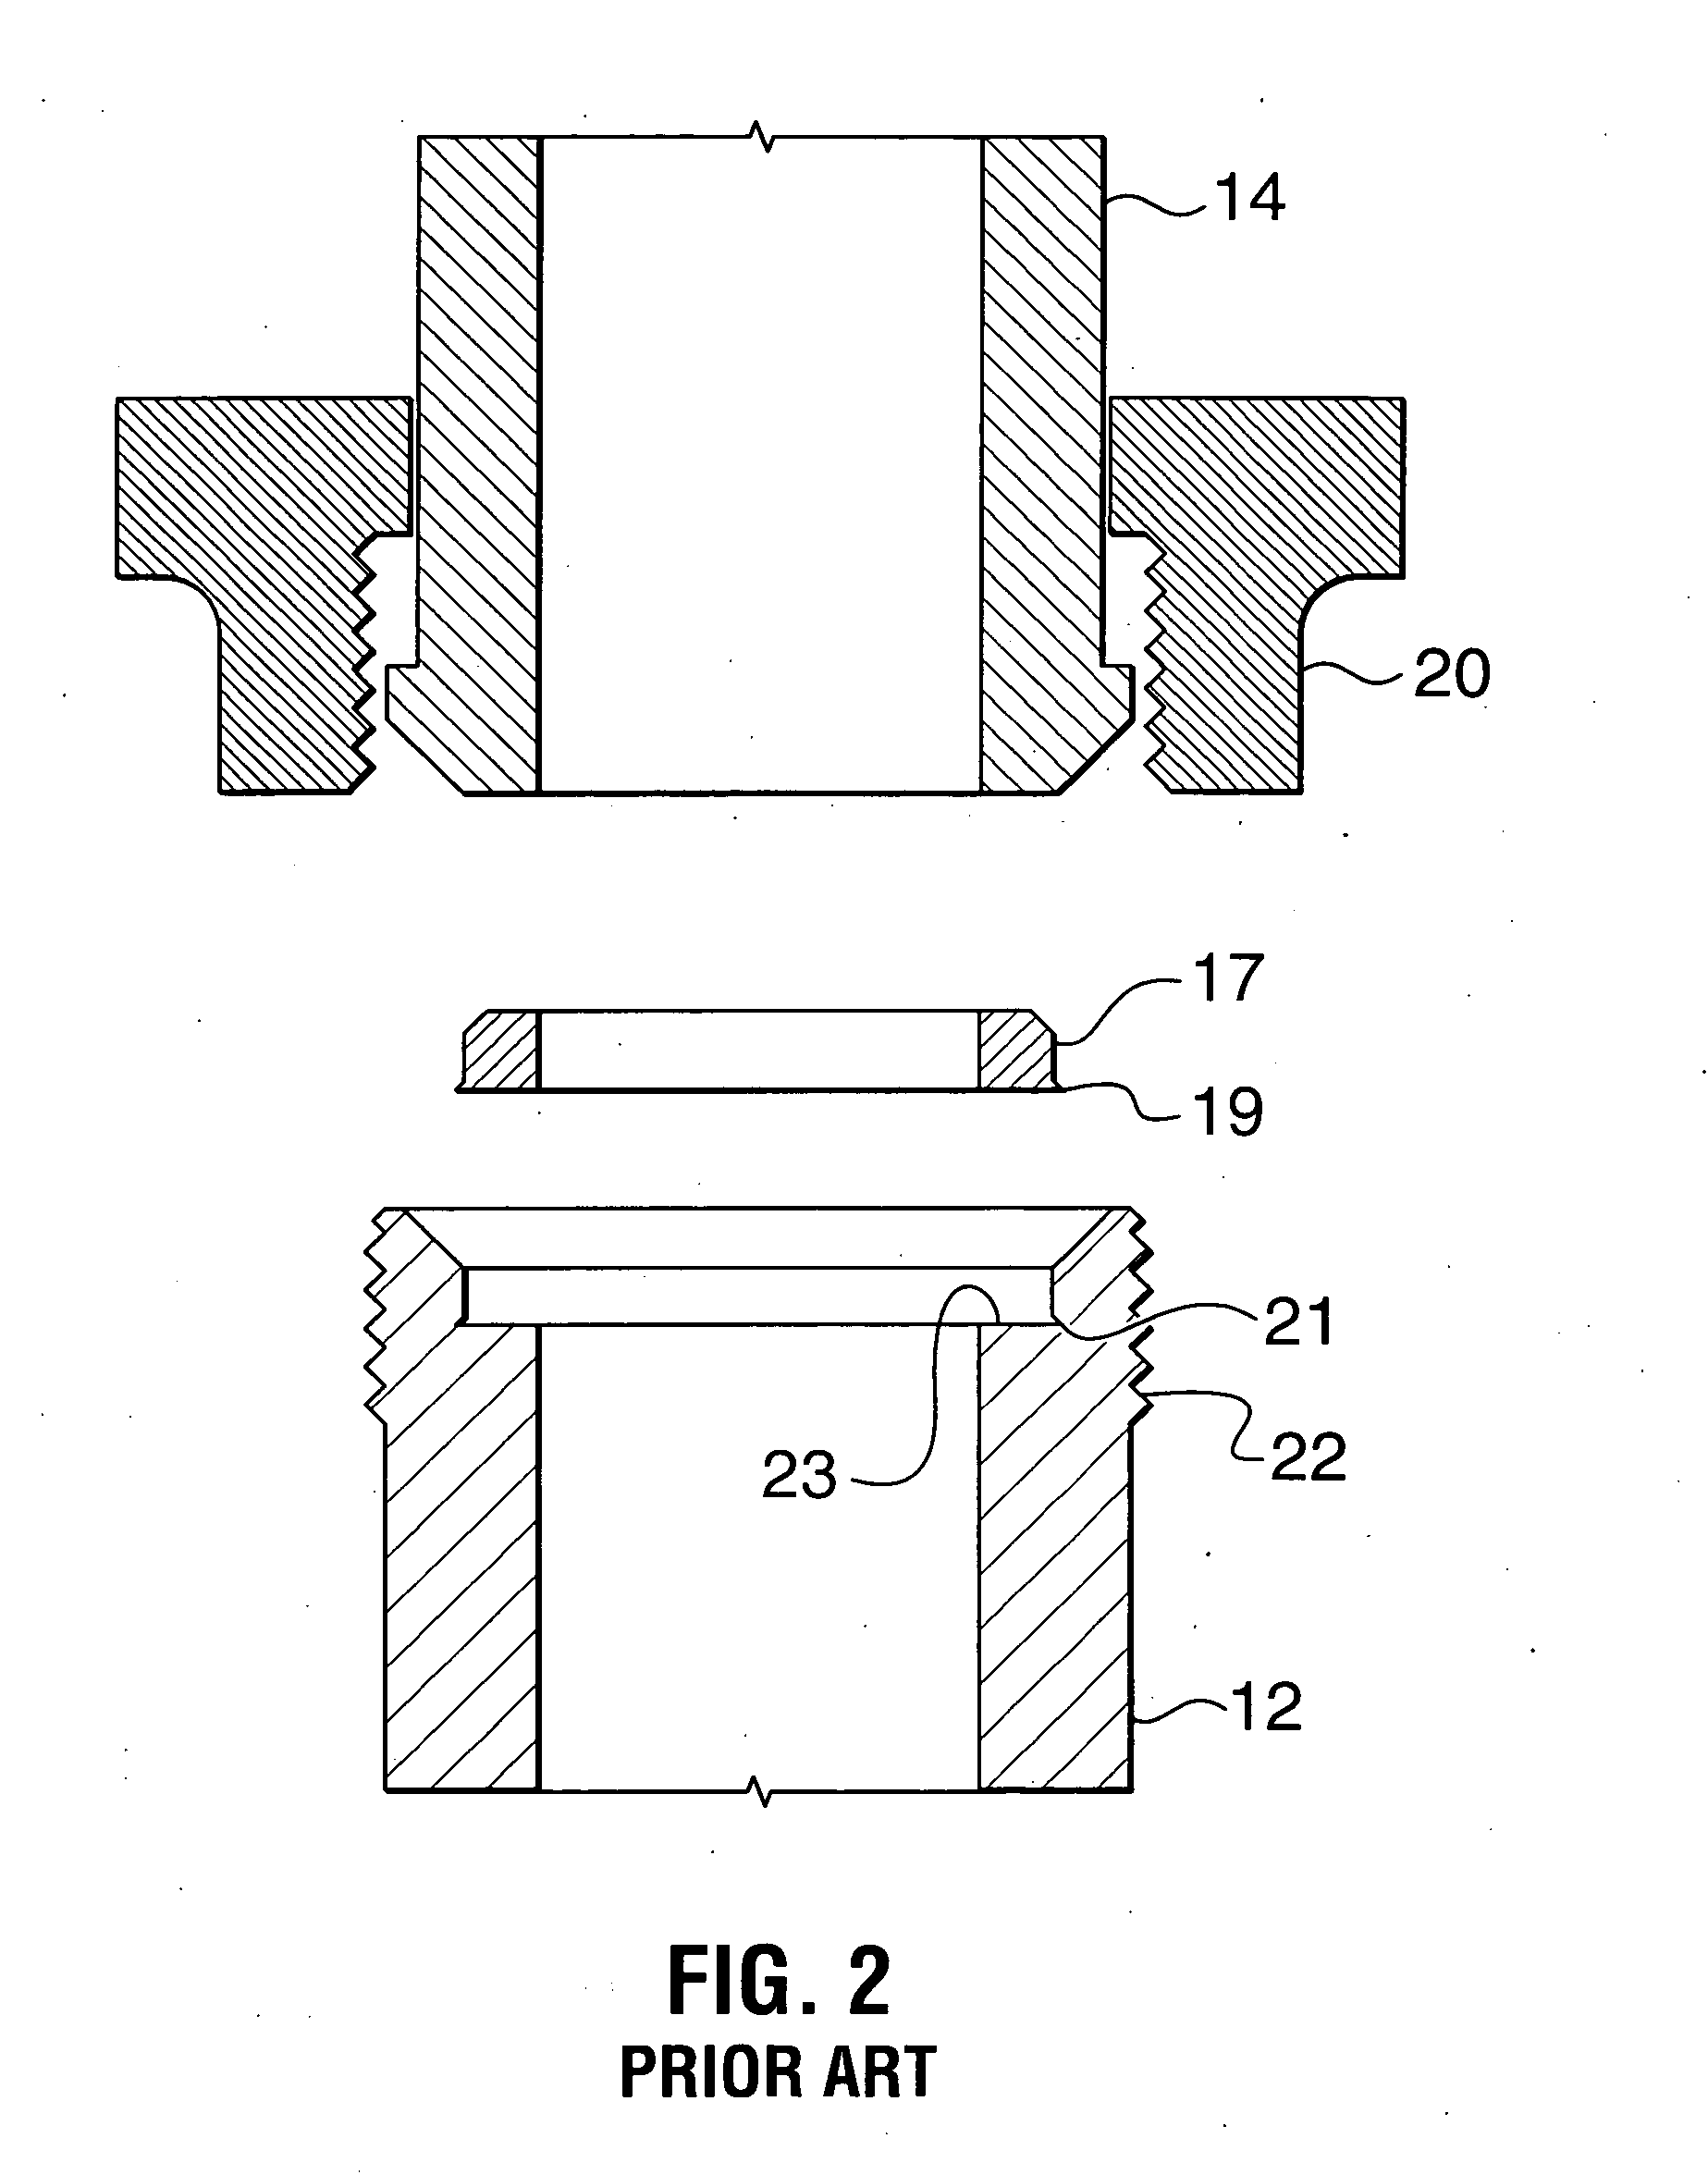 Metal ring gasket for a threaded union